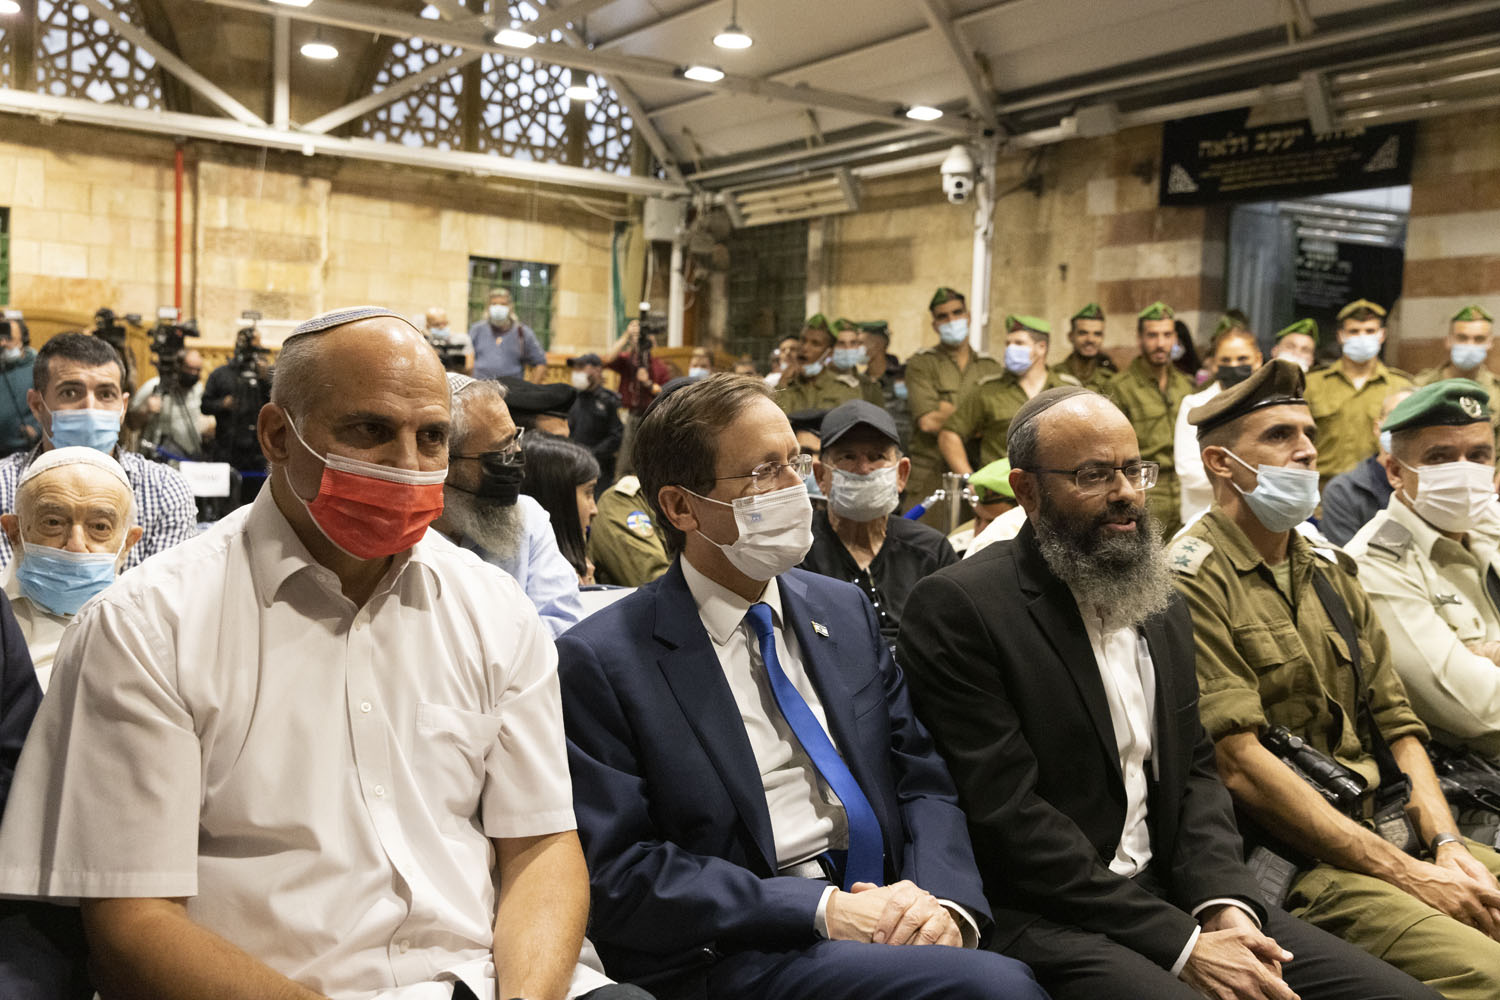 Israeli President Isaac Herzog attends a ceremony marking the first night of Hanukkah in the Tomb of the Patriarchs/Ibrahimi Mosque in the Old City of Hebron, occupied West Bank, Nov. 28, 2021. (Oren Ziv)